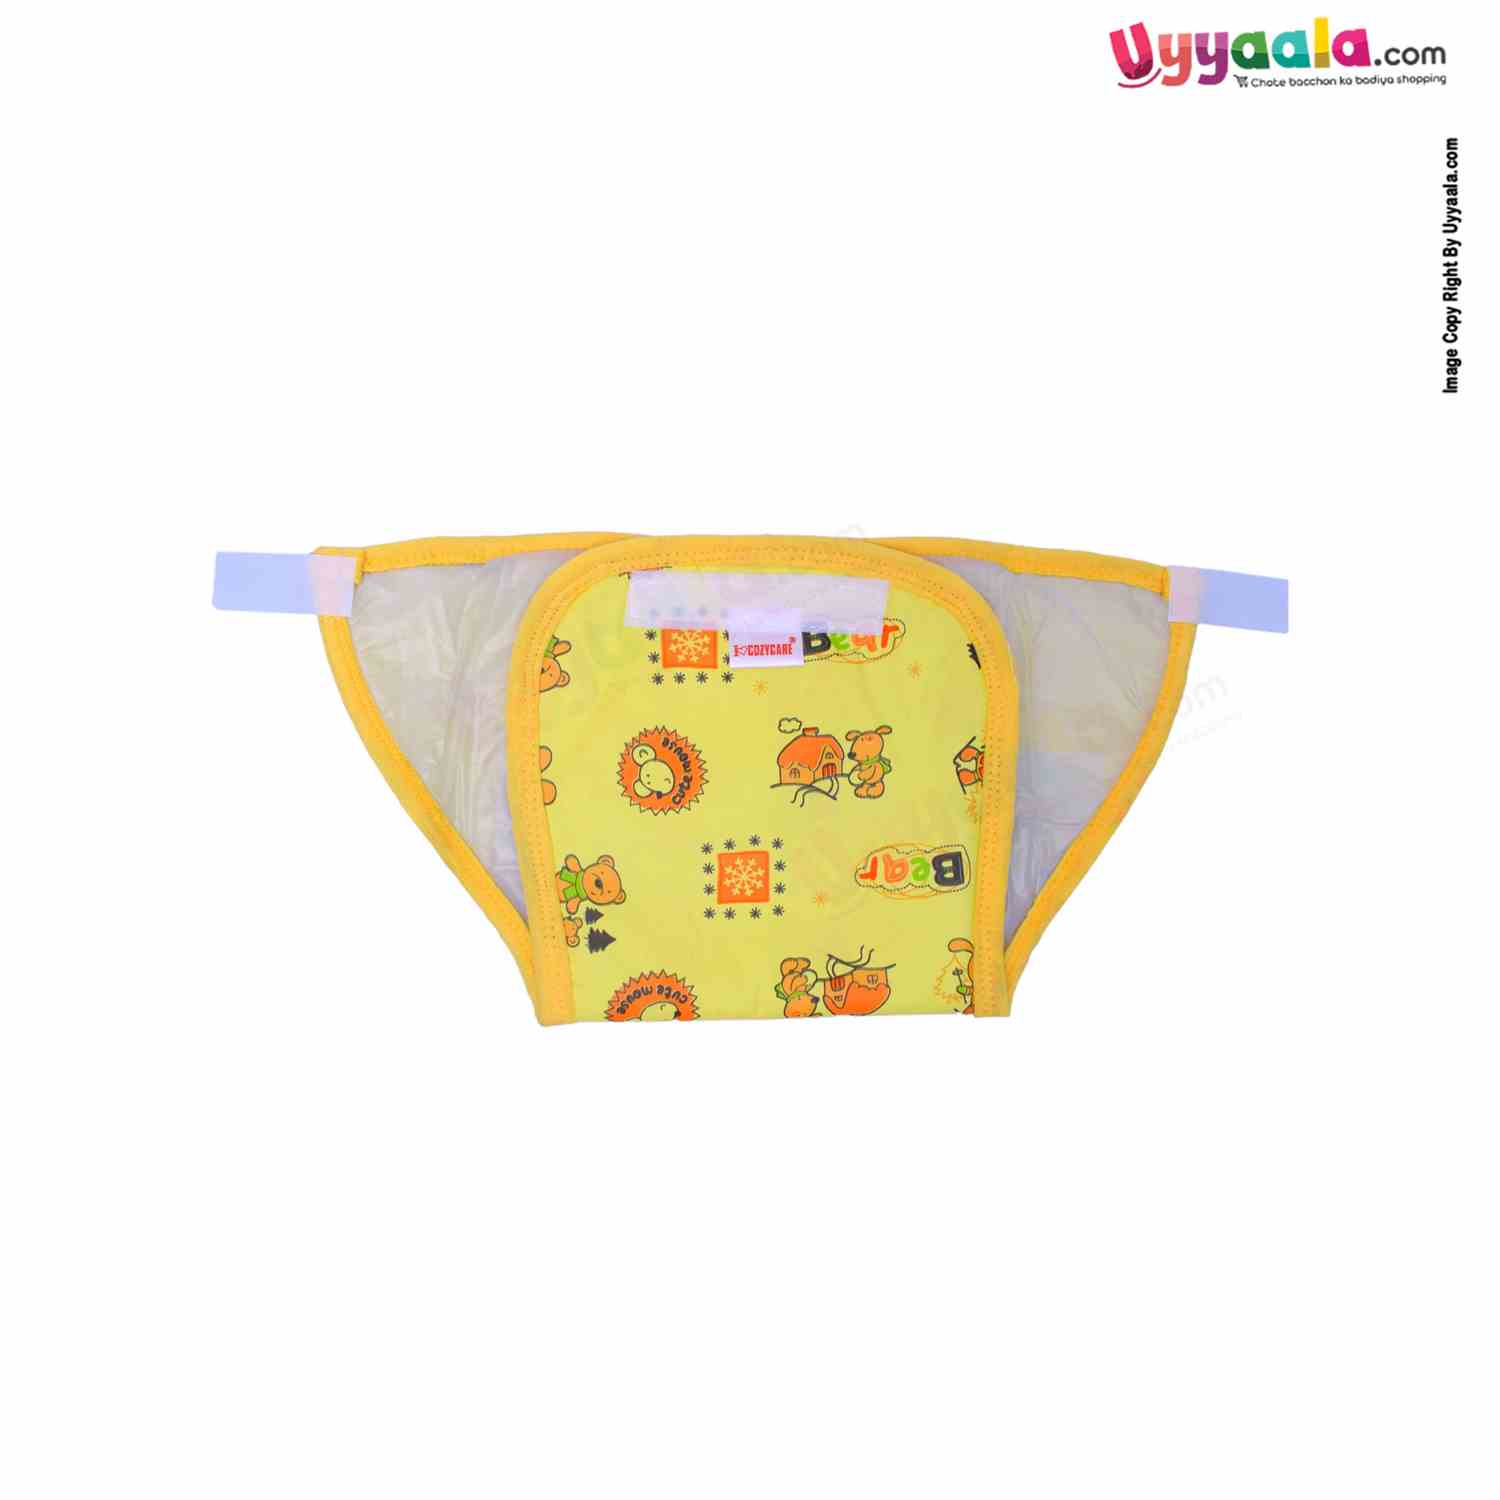 COZYCARE Washable Diapers Plastic, Velcro Bear Print Pink, Blue & Yellow without Pads- 3P Set (XL)